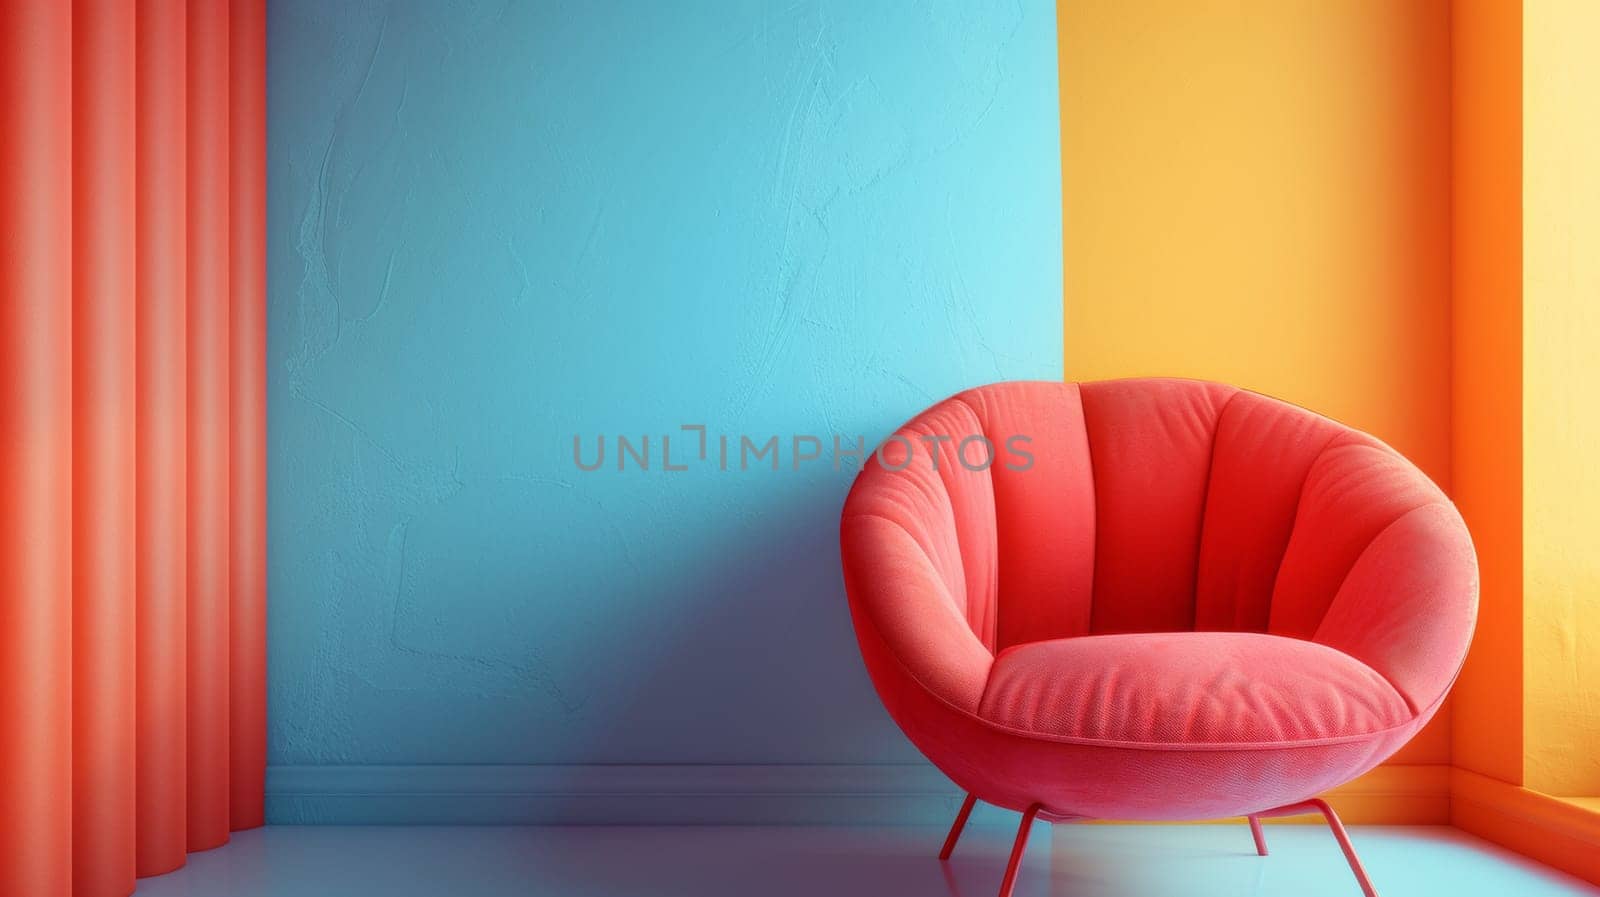 A red chair in a room with blue and orange walls